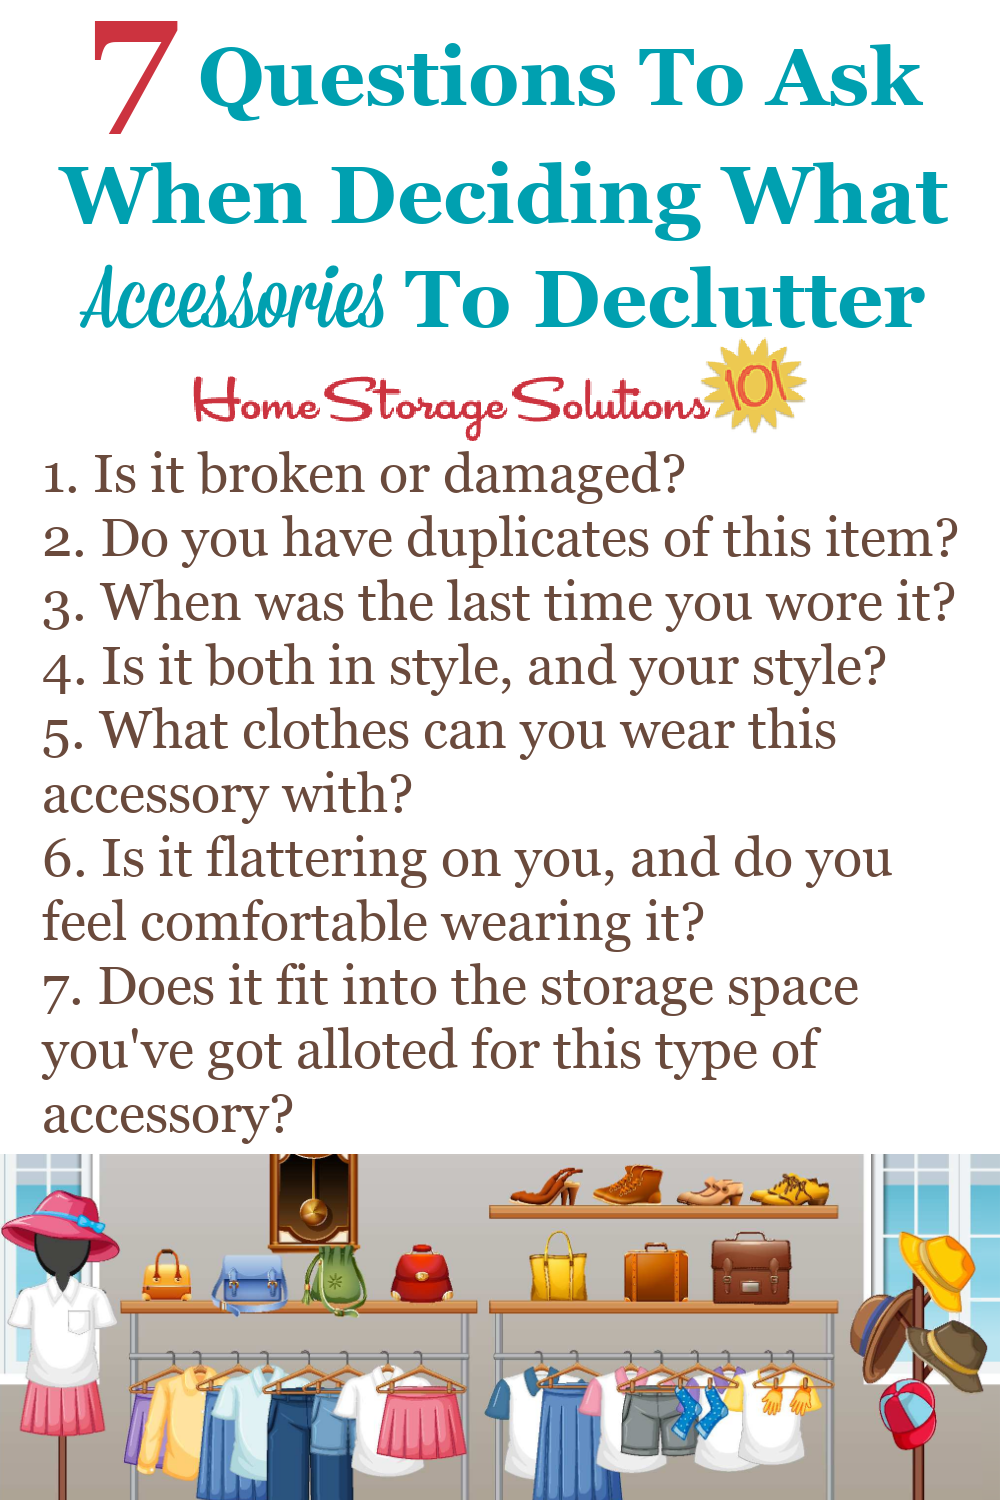 7 questions to ask when deciding what accessories to declutter from your closet and home {a #Declutter365 mission on Home Storage Solutions 101} #DeclutterAccessories #DeclutterCloset